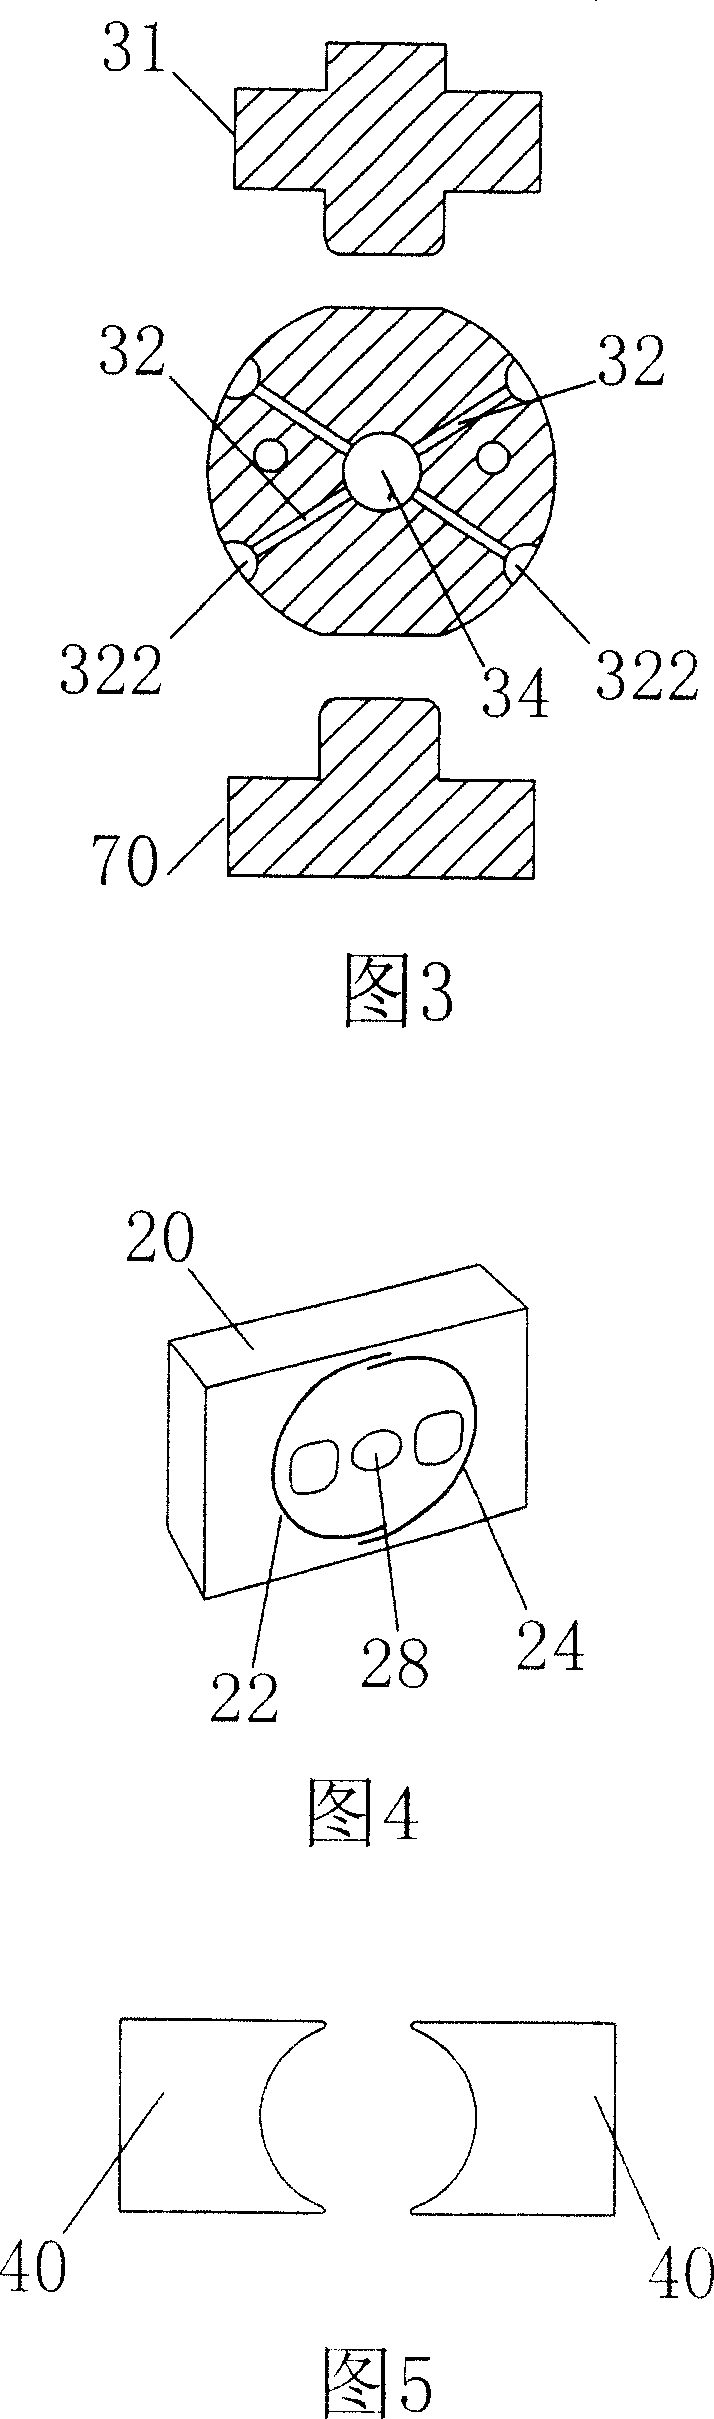 Process and apparatus for melting and welding plastic sheet to produce pipe